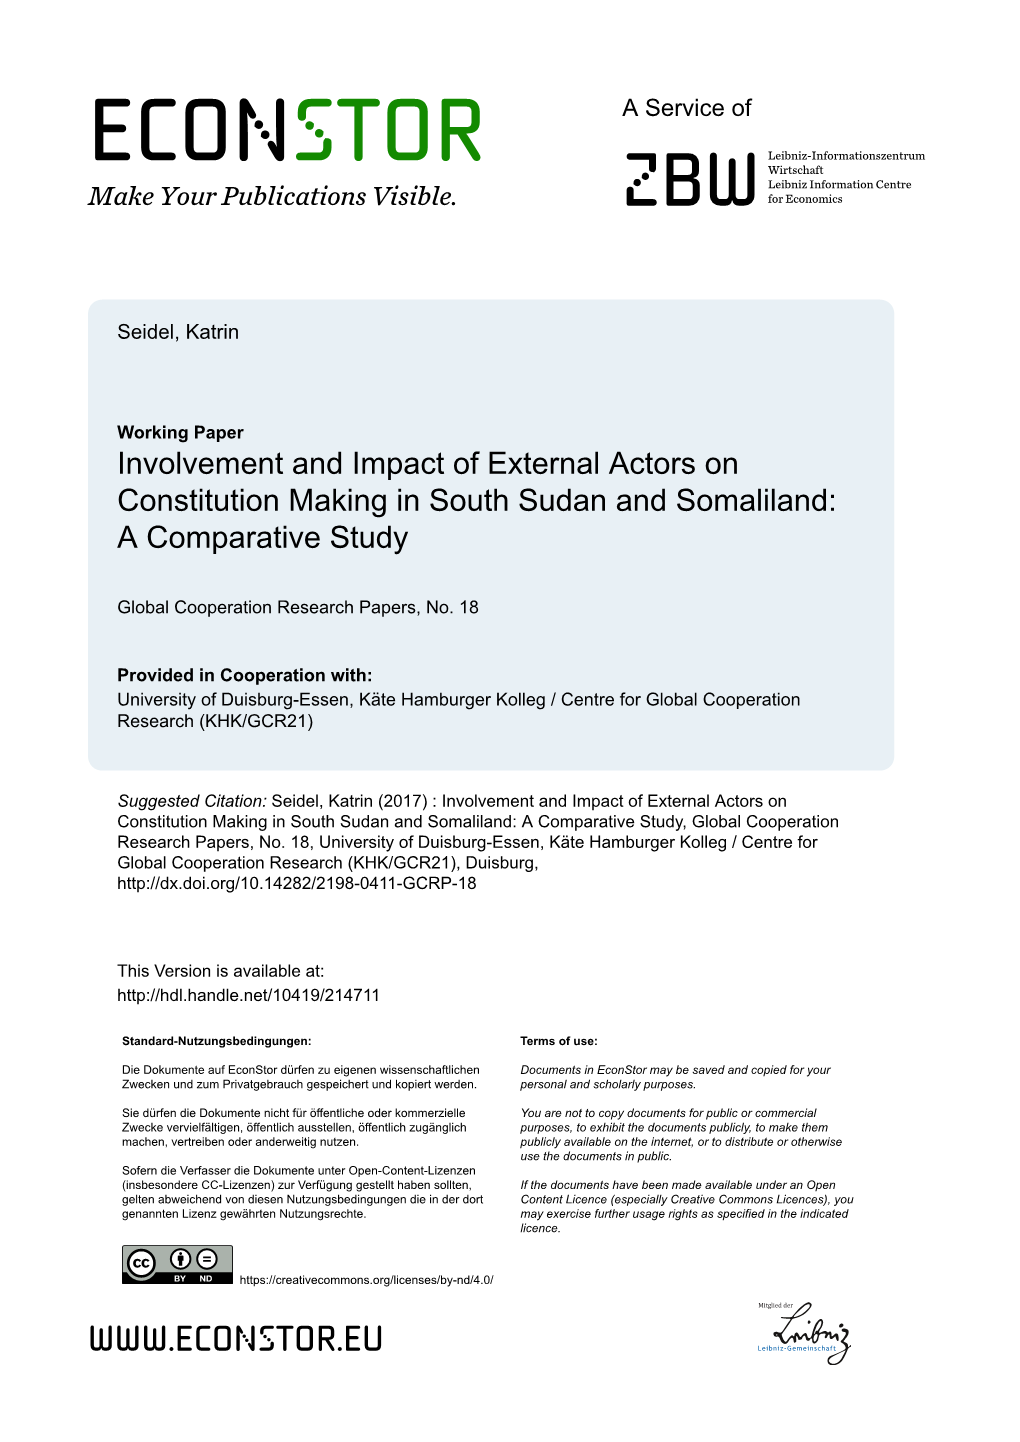 Involvement and Impact of External Actors on Constitution Making in South Sudan and Somaliland: a Comparative Study